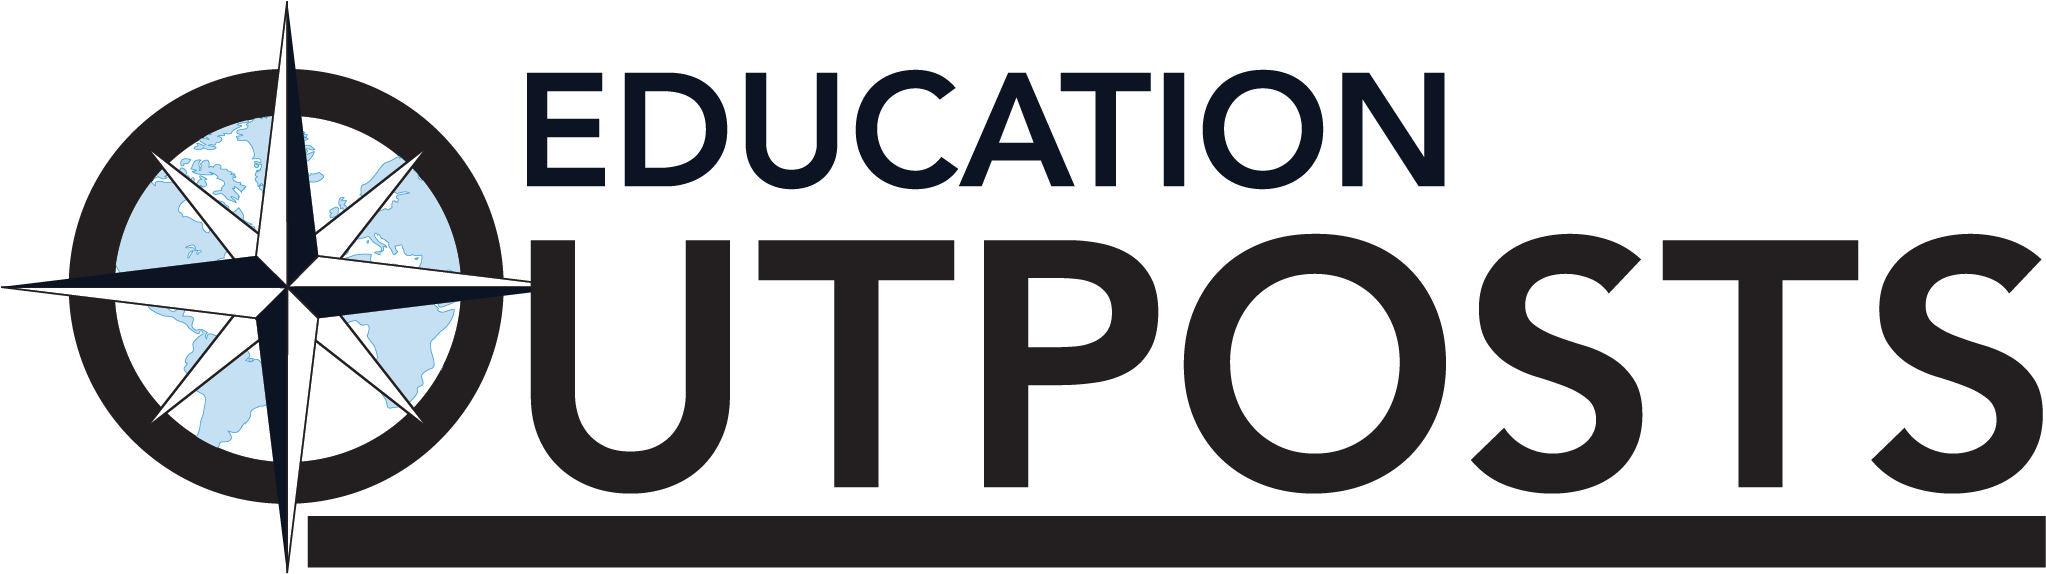 Education Outposts Logo